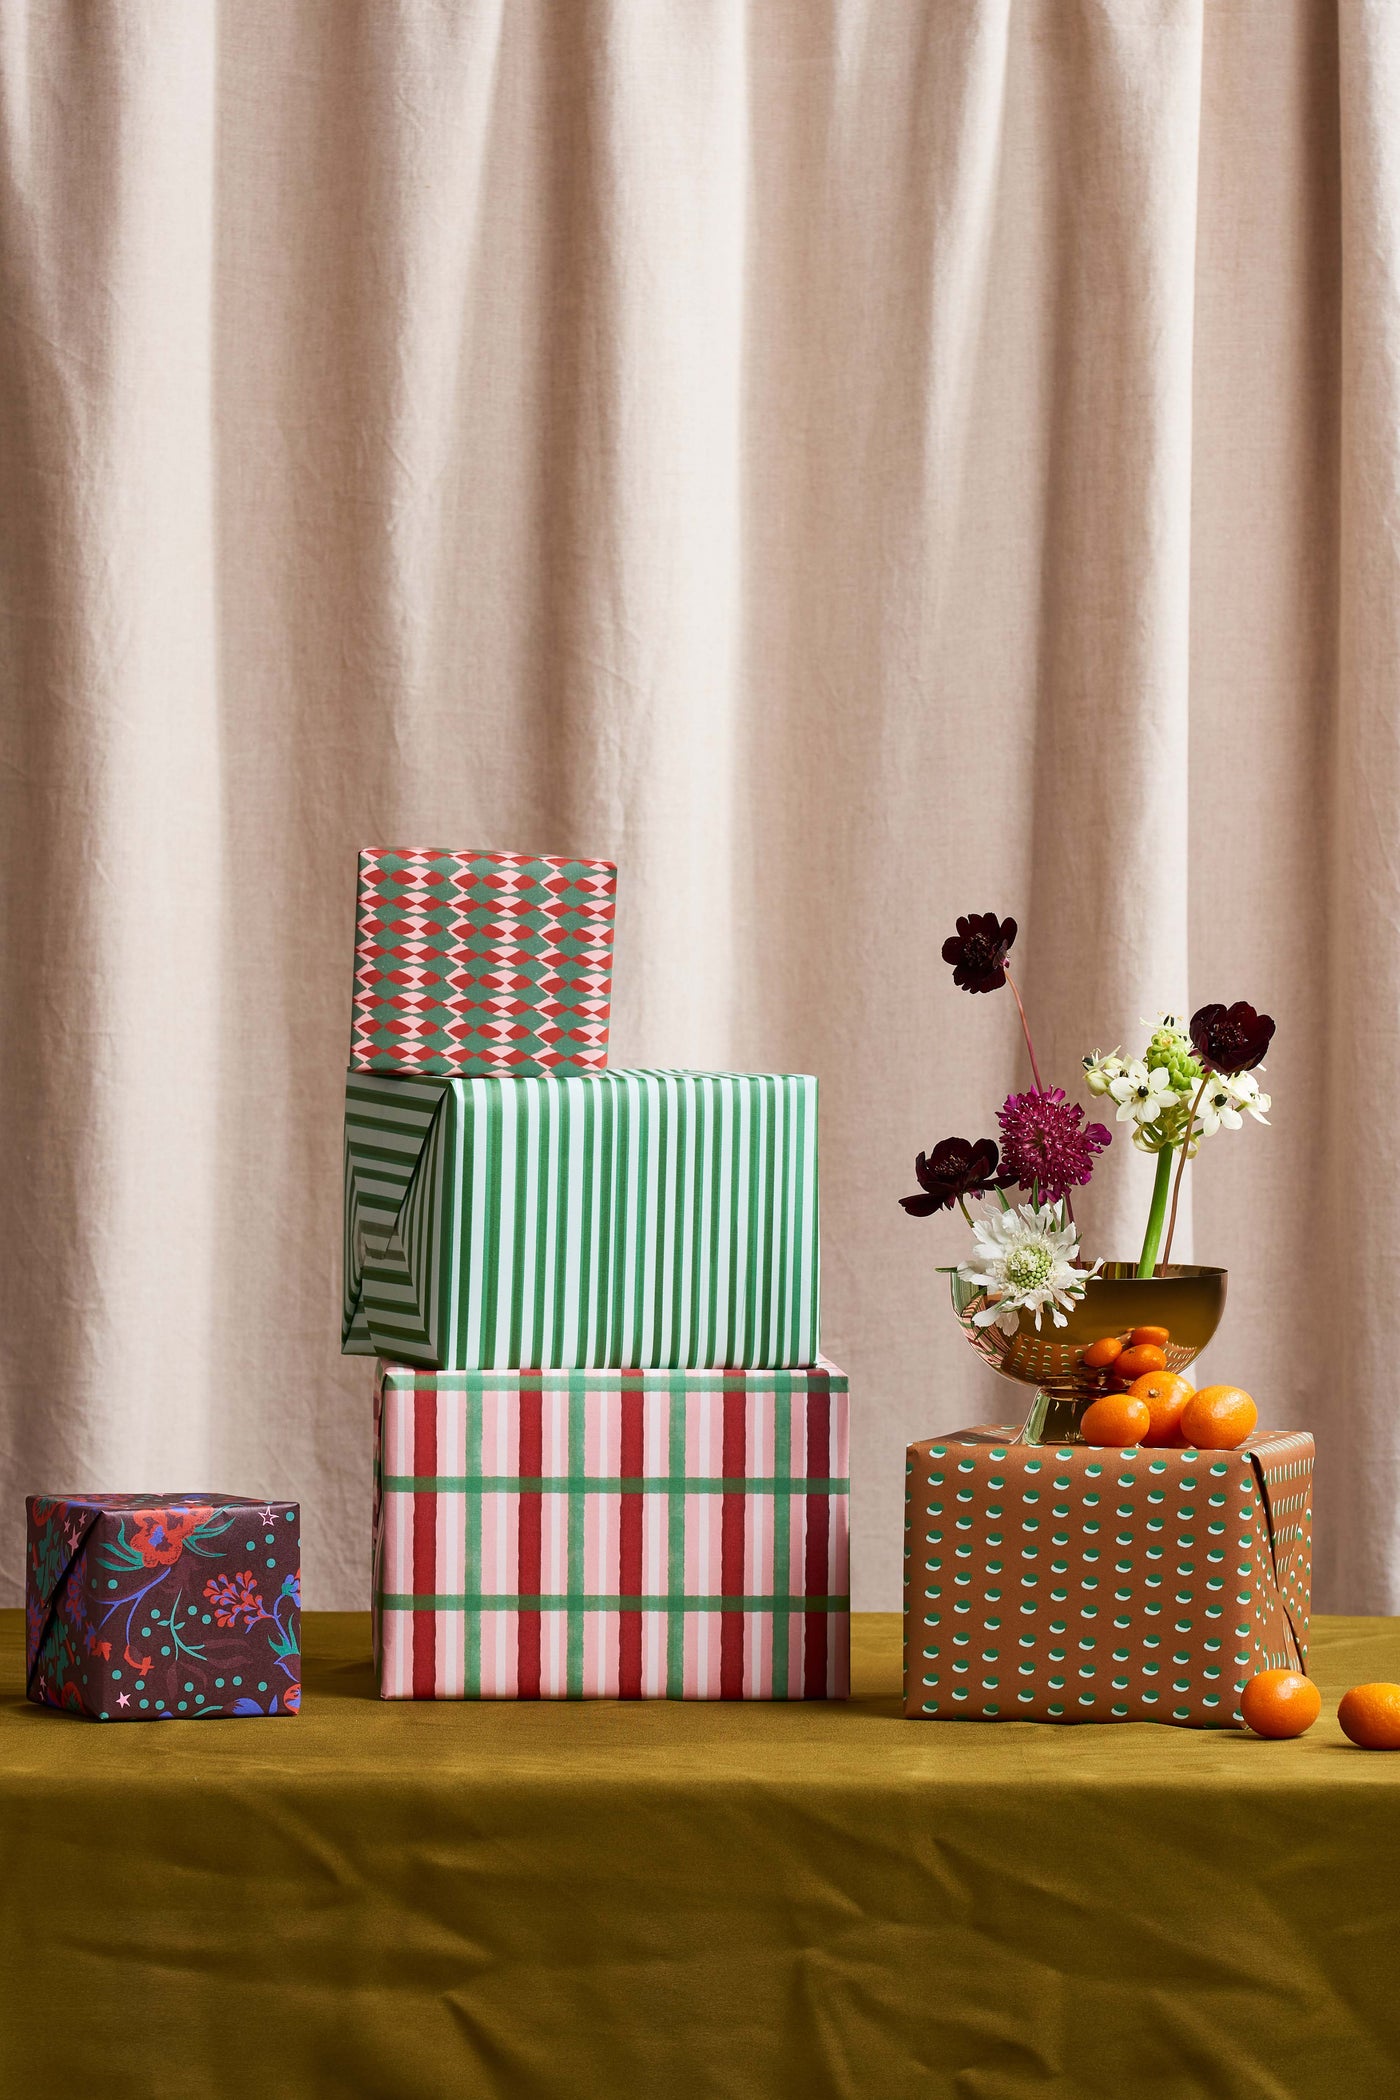 Small box wrapped in red and green diamond gift wrap